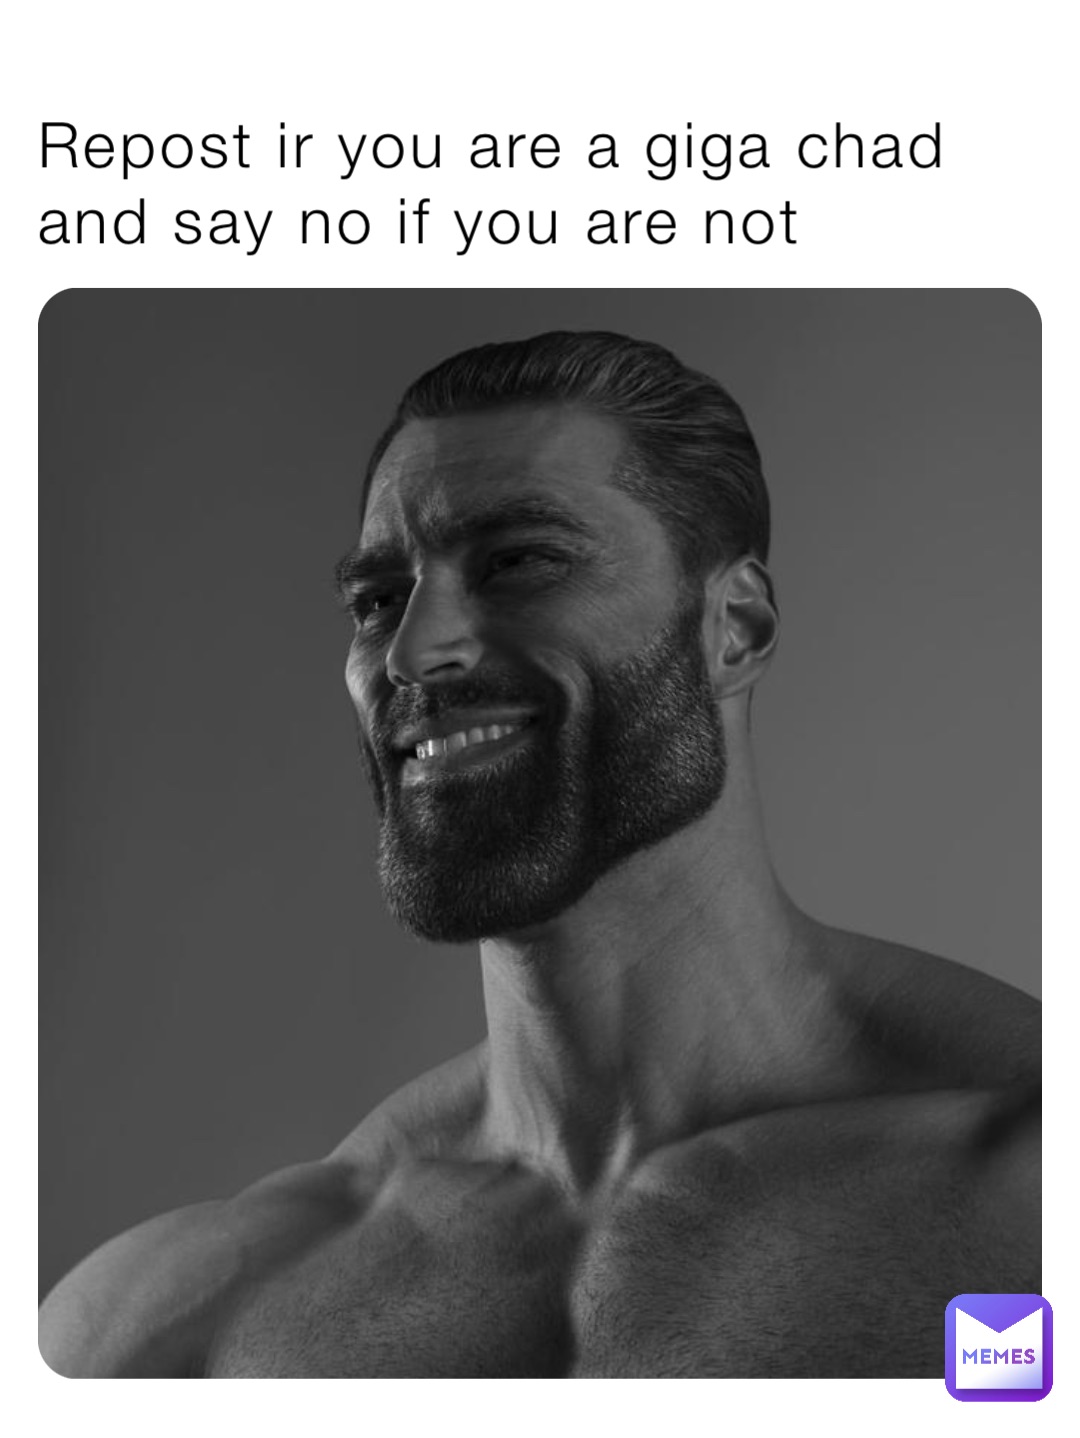 Repost ir you are a giga chad and say no if you are not